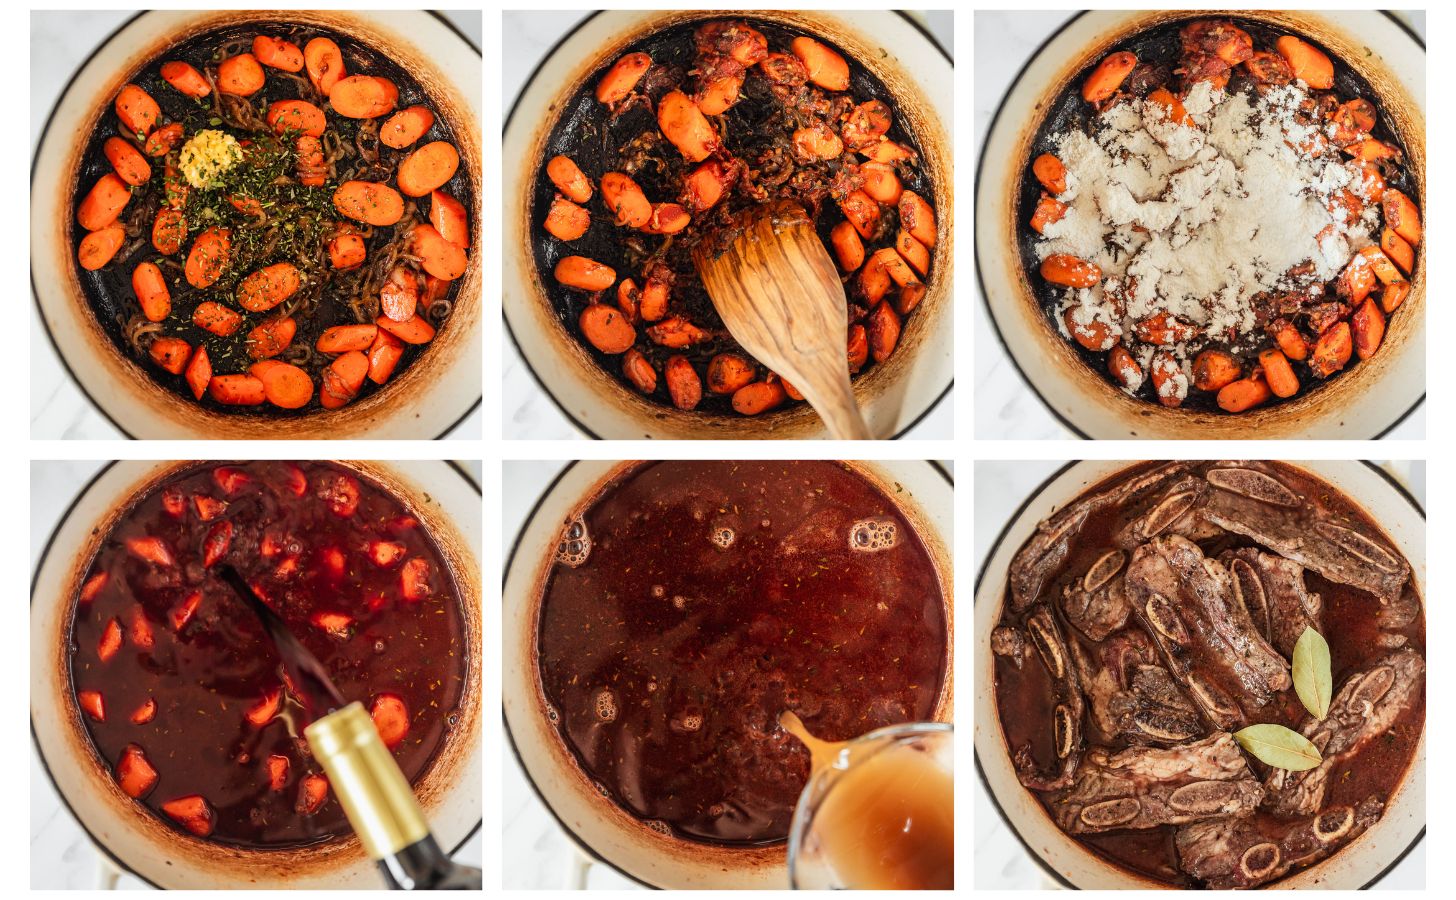 Six steps to making short rib beef bourguignon. In photo 1, carrots and shallots are cooking in a white pot. In photo 2, the pot has tomato paste in it. In photo 3, the pot has flour in it. In photo 4, wine is being poured into the pot. In photo 5, beef broth is being poured into the pot. In photo 6, the pot has short ribs and bay leaves in it.